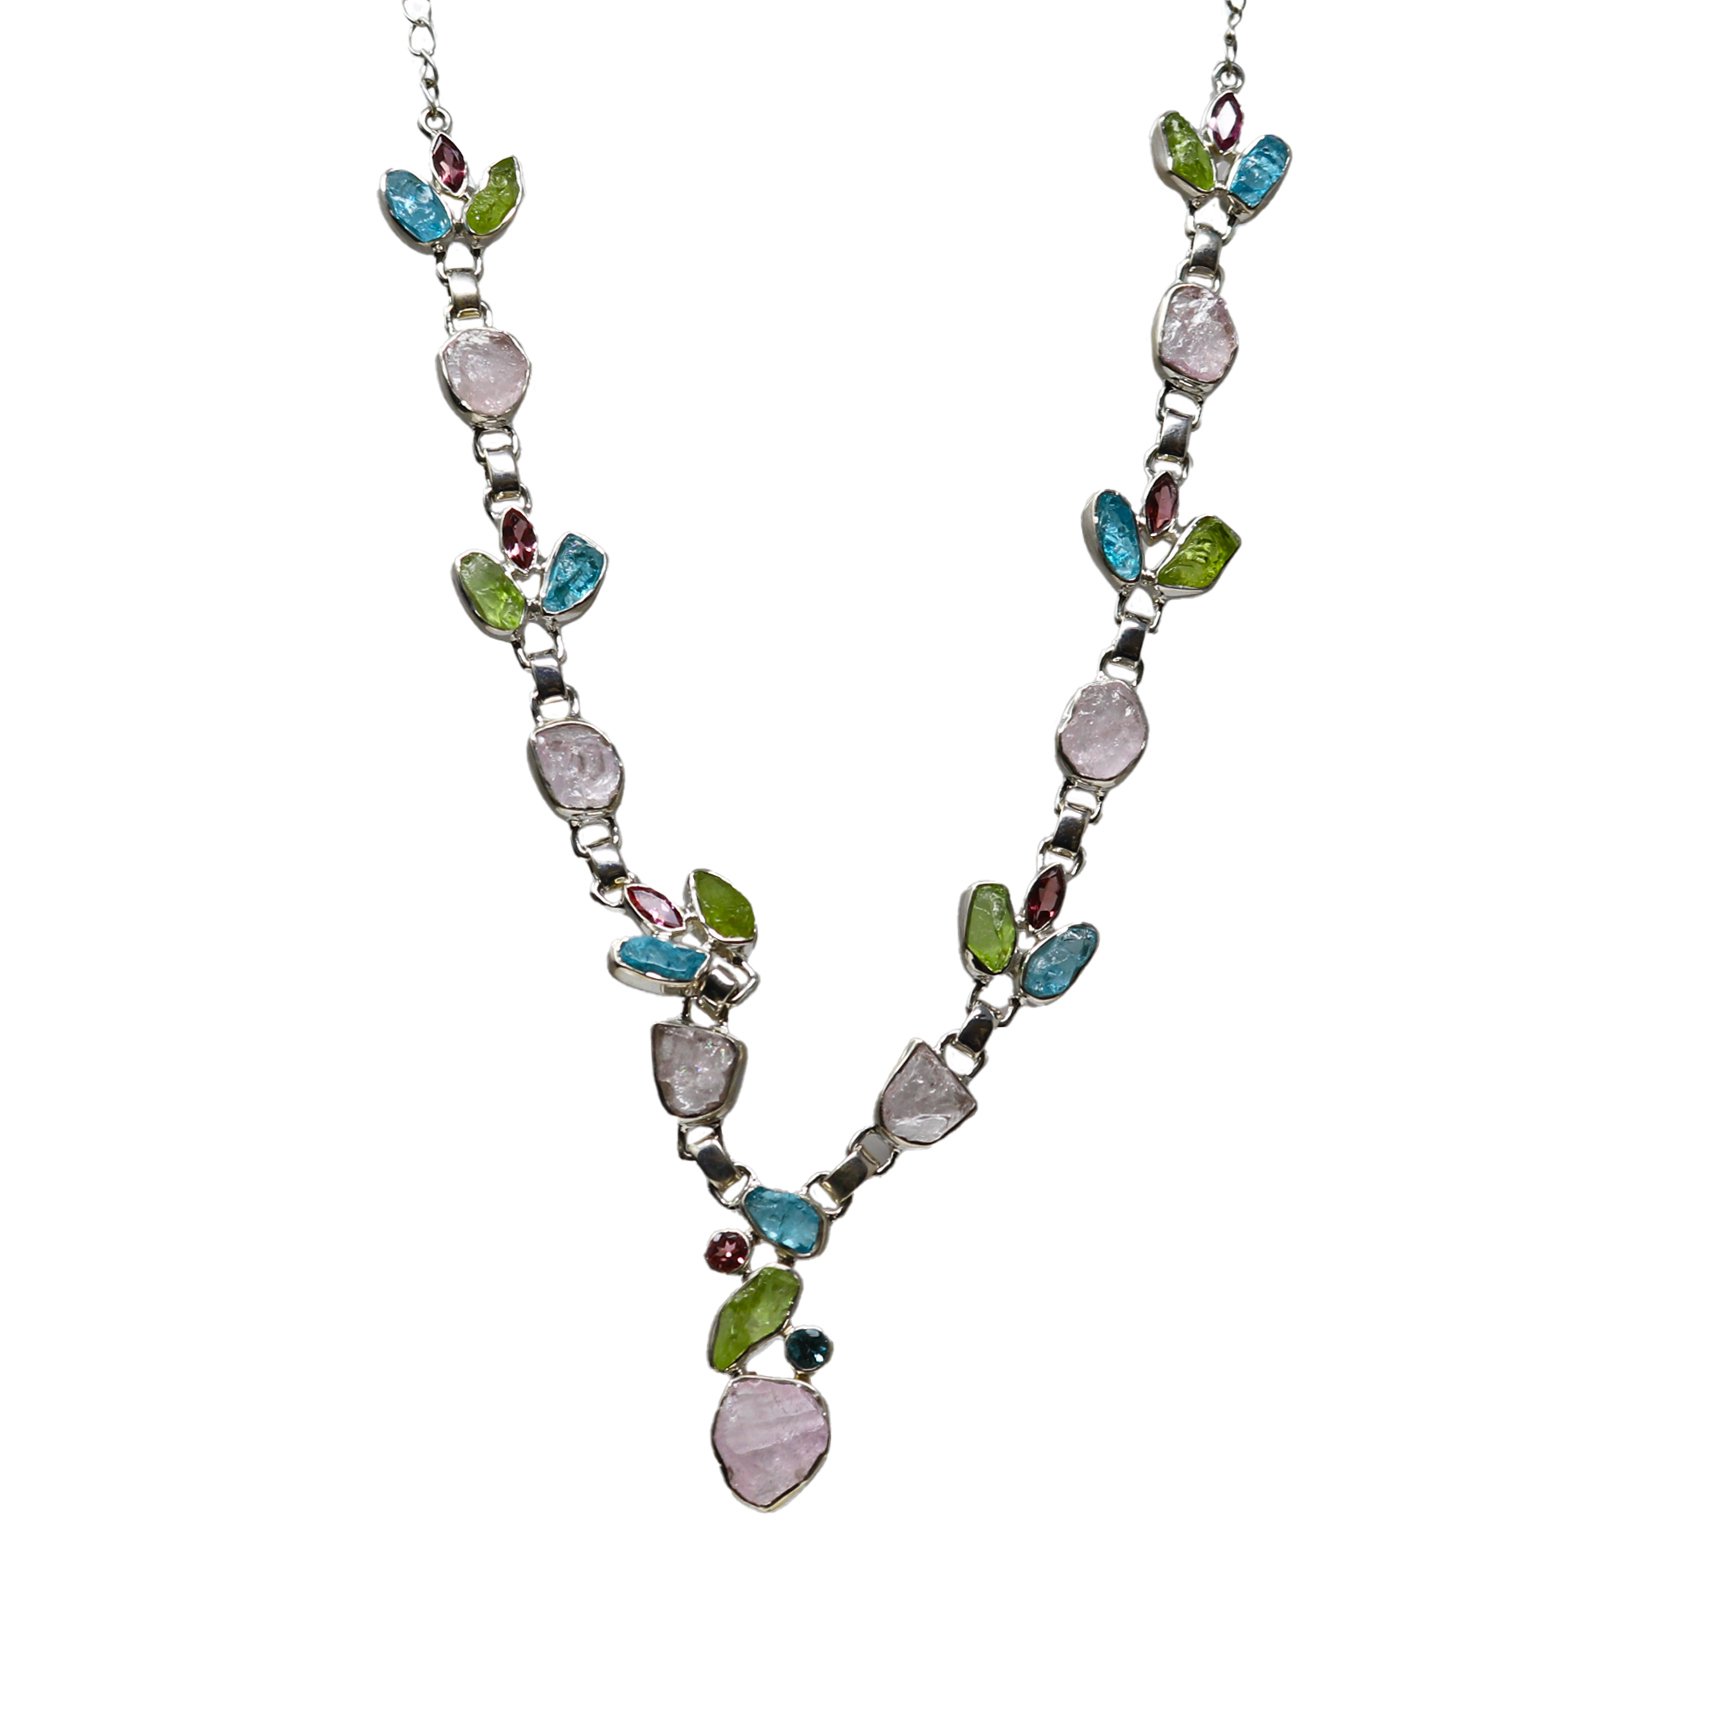 Morganite Necklace - 7 Rough Freeforms with 7 Trios of Rough Peridot & Blue Apatite Freeforms with Faceted Pink Tourmaline Sharp Oval - 925 Sterling Silver Bezels